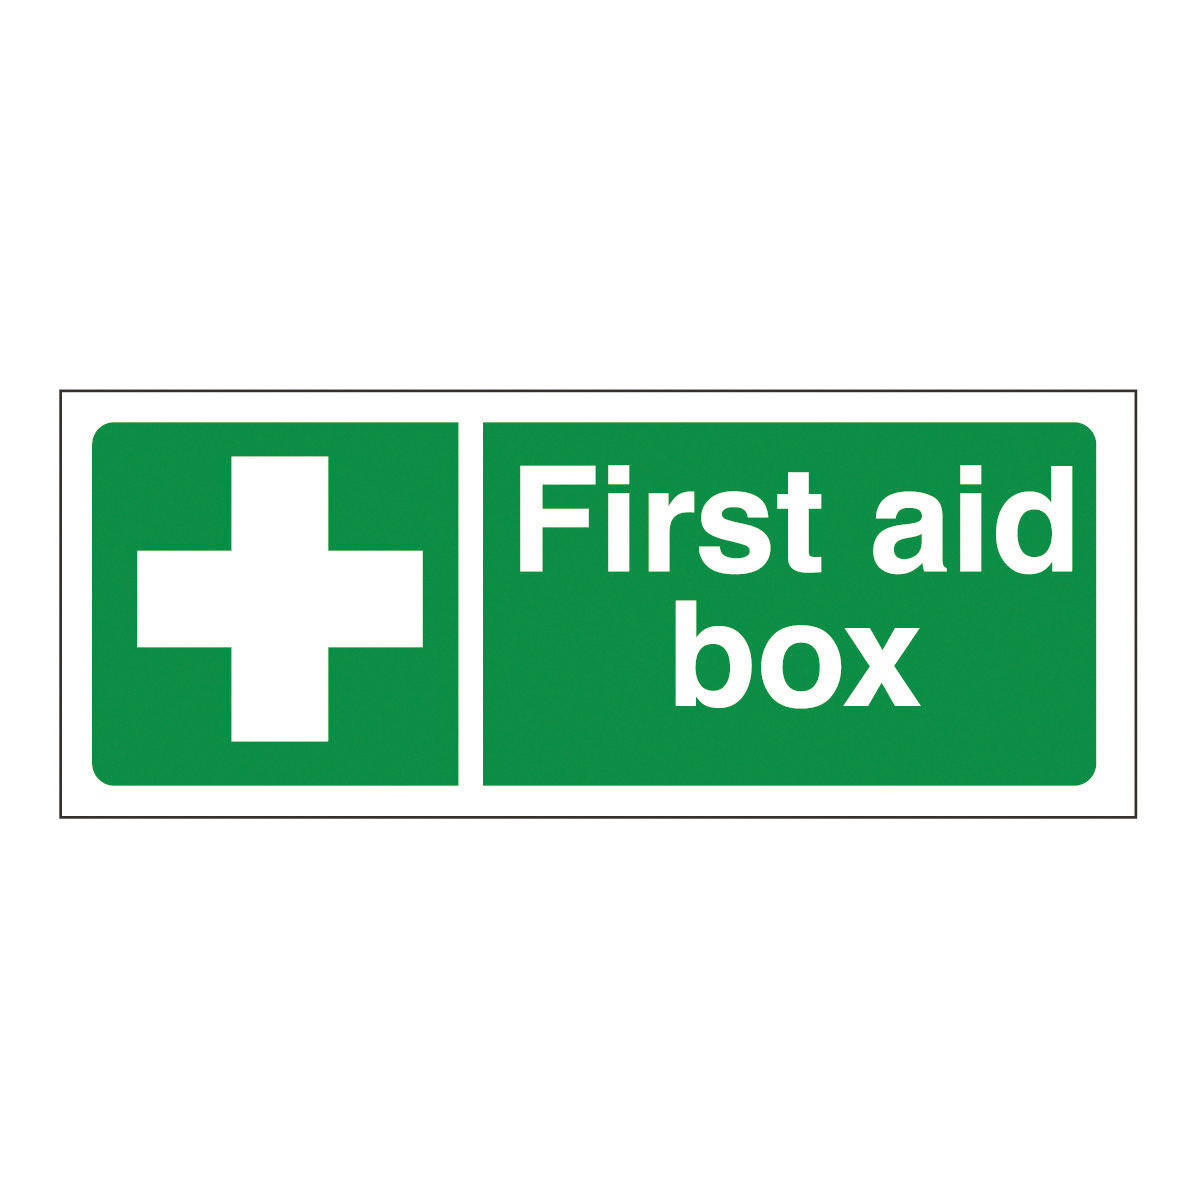 First Aid Box Safety Signs - Warehouse Signs & Label from BiGDUG UK